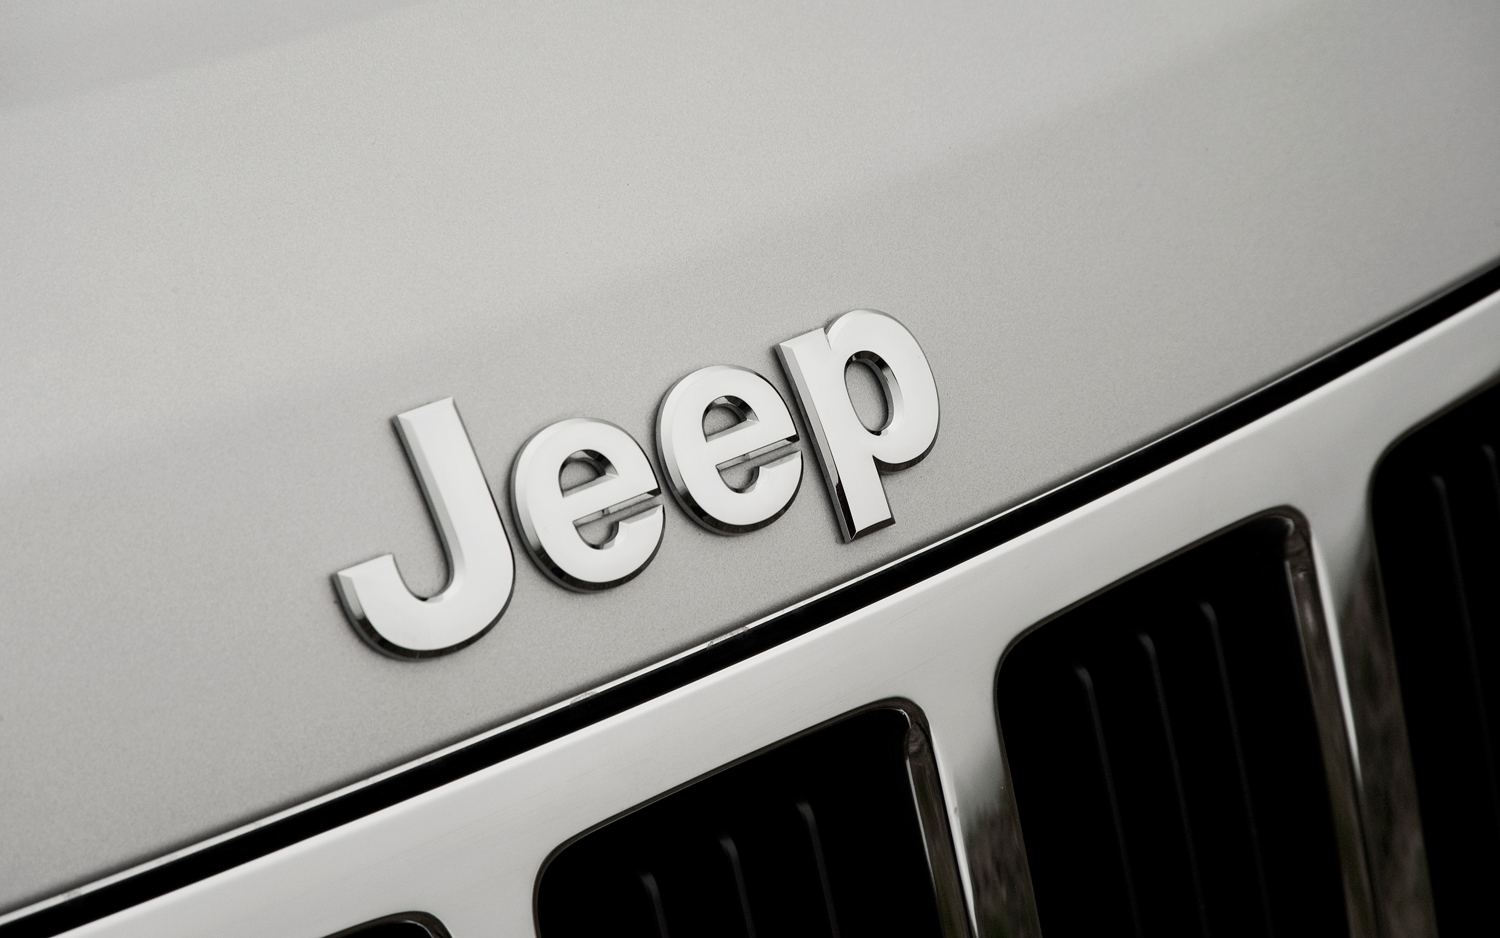 Jeep Brand in Japan